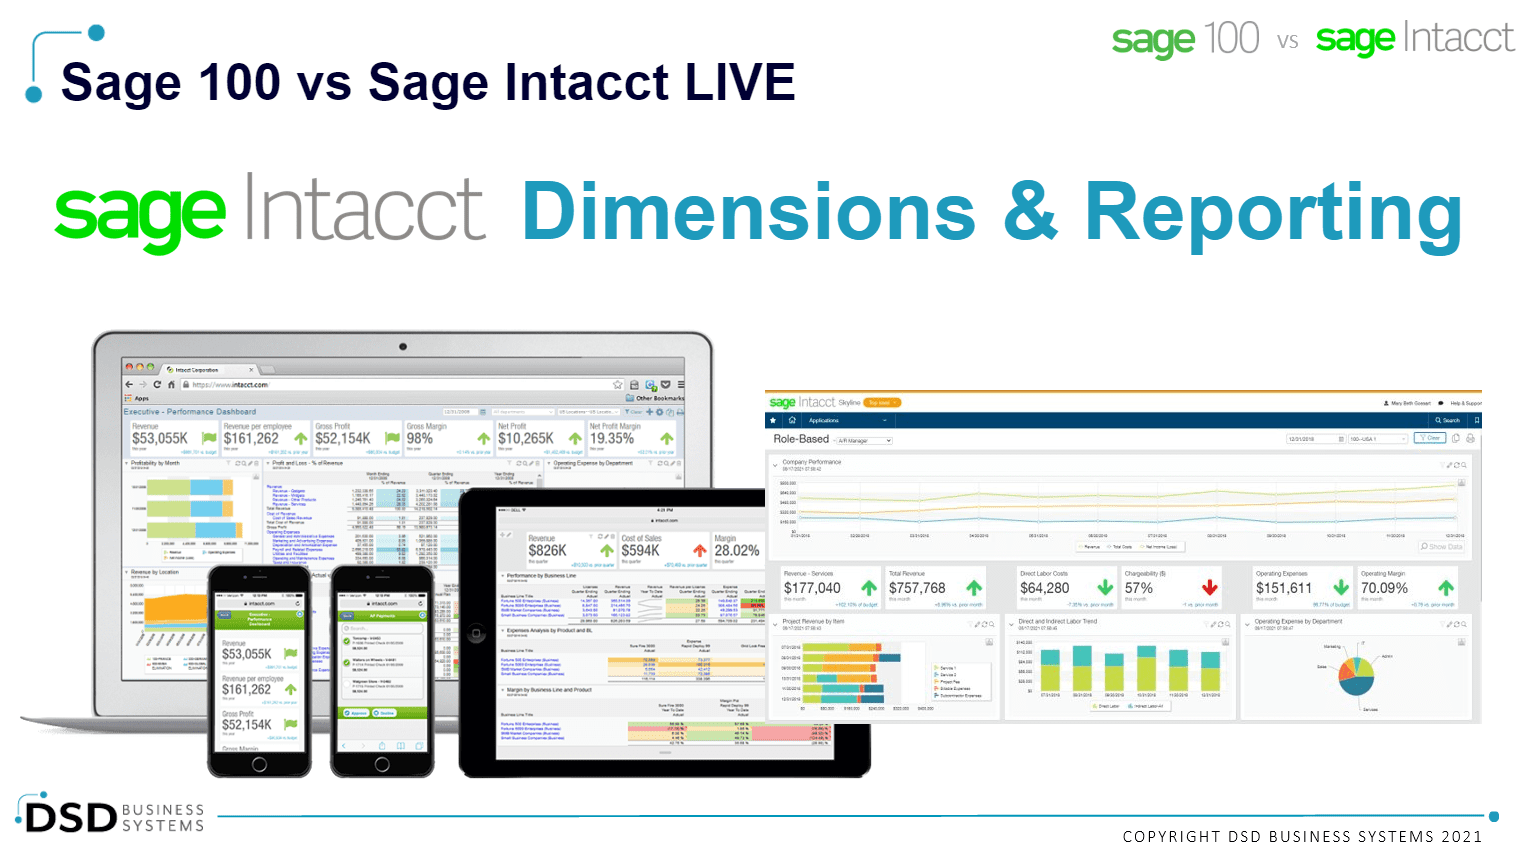 Sage Intacct Dimensions and Reporting